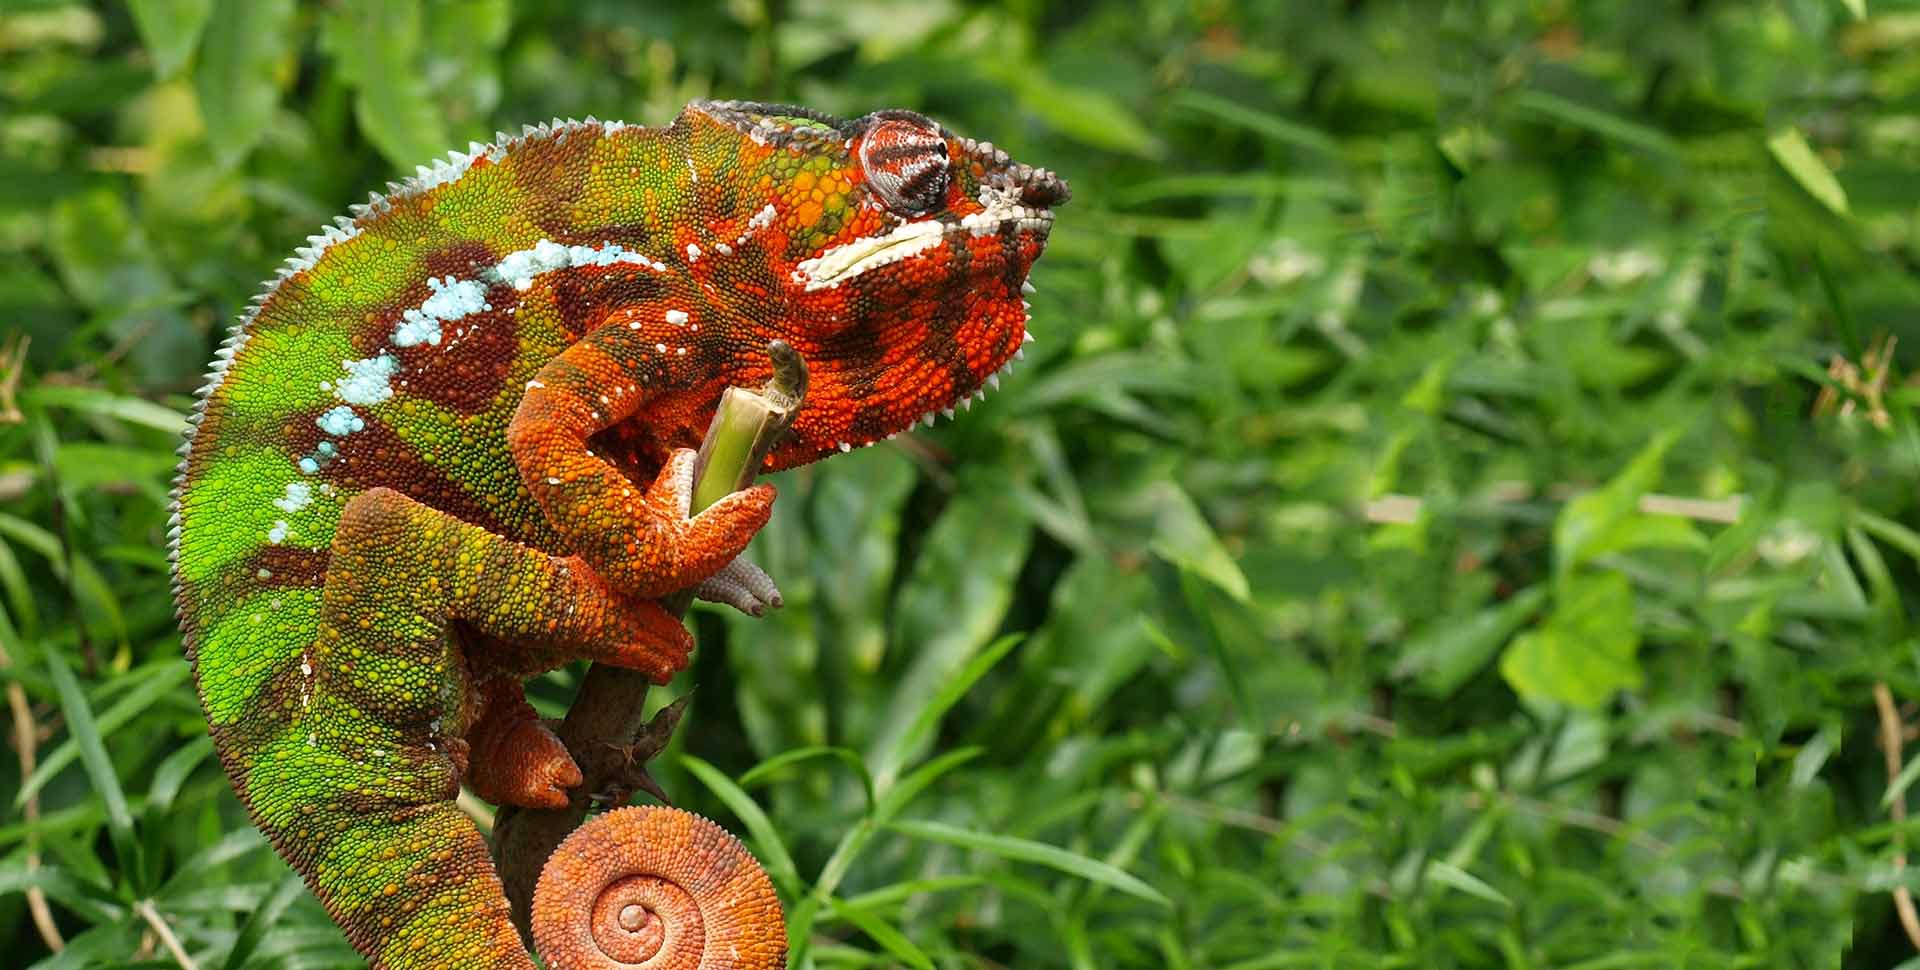 Should You Keep a Panther Chameleon as a Pet?